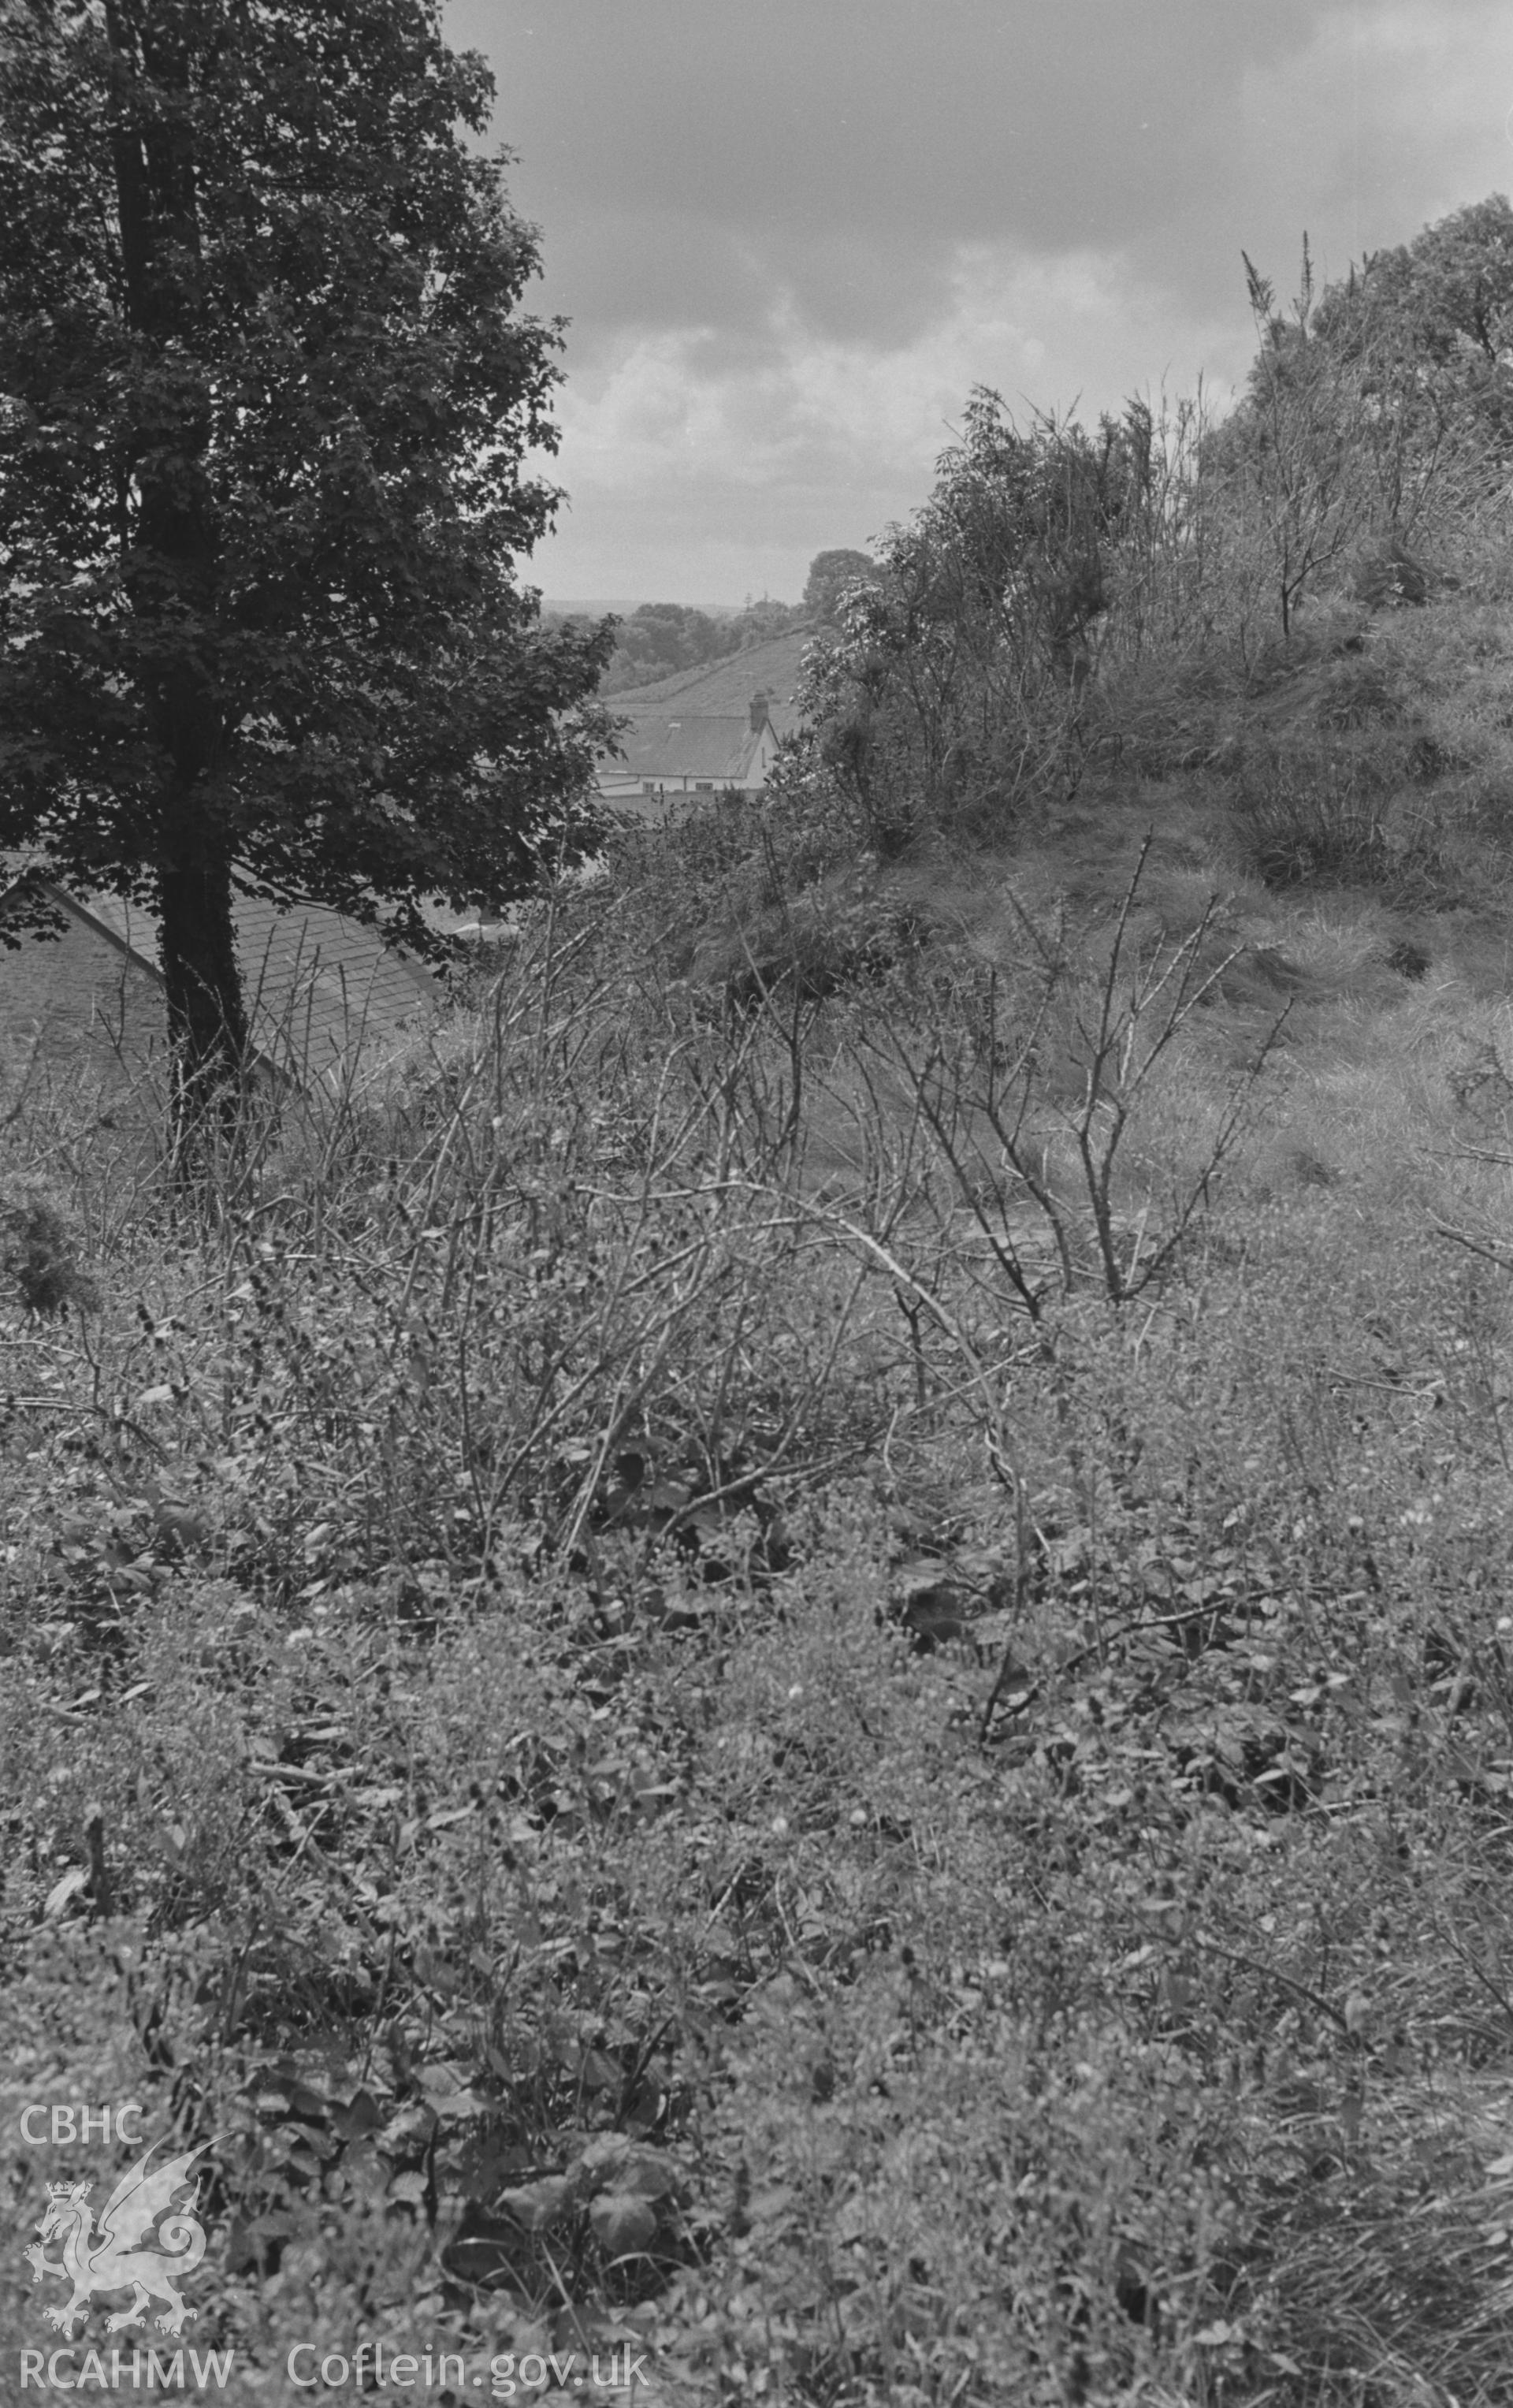 Digital copy of a black and white negative showing view along the south east side of the Norman motte (right) of Castell Ddol-Wlff, Llanybydder. Photographed in September 1963 by Arthur O. Chater from Grid Reference SN 5205 4452, looking south west.